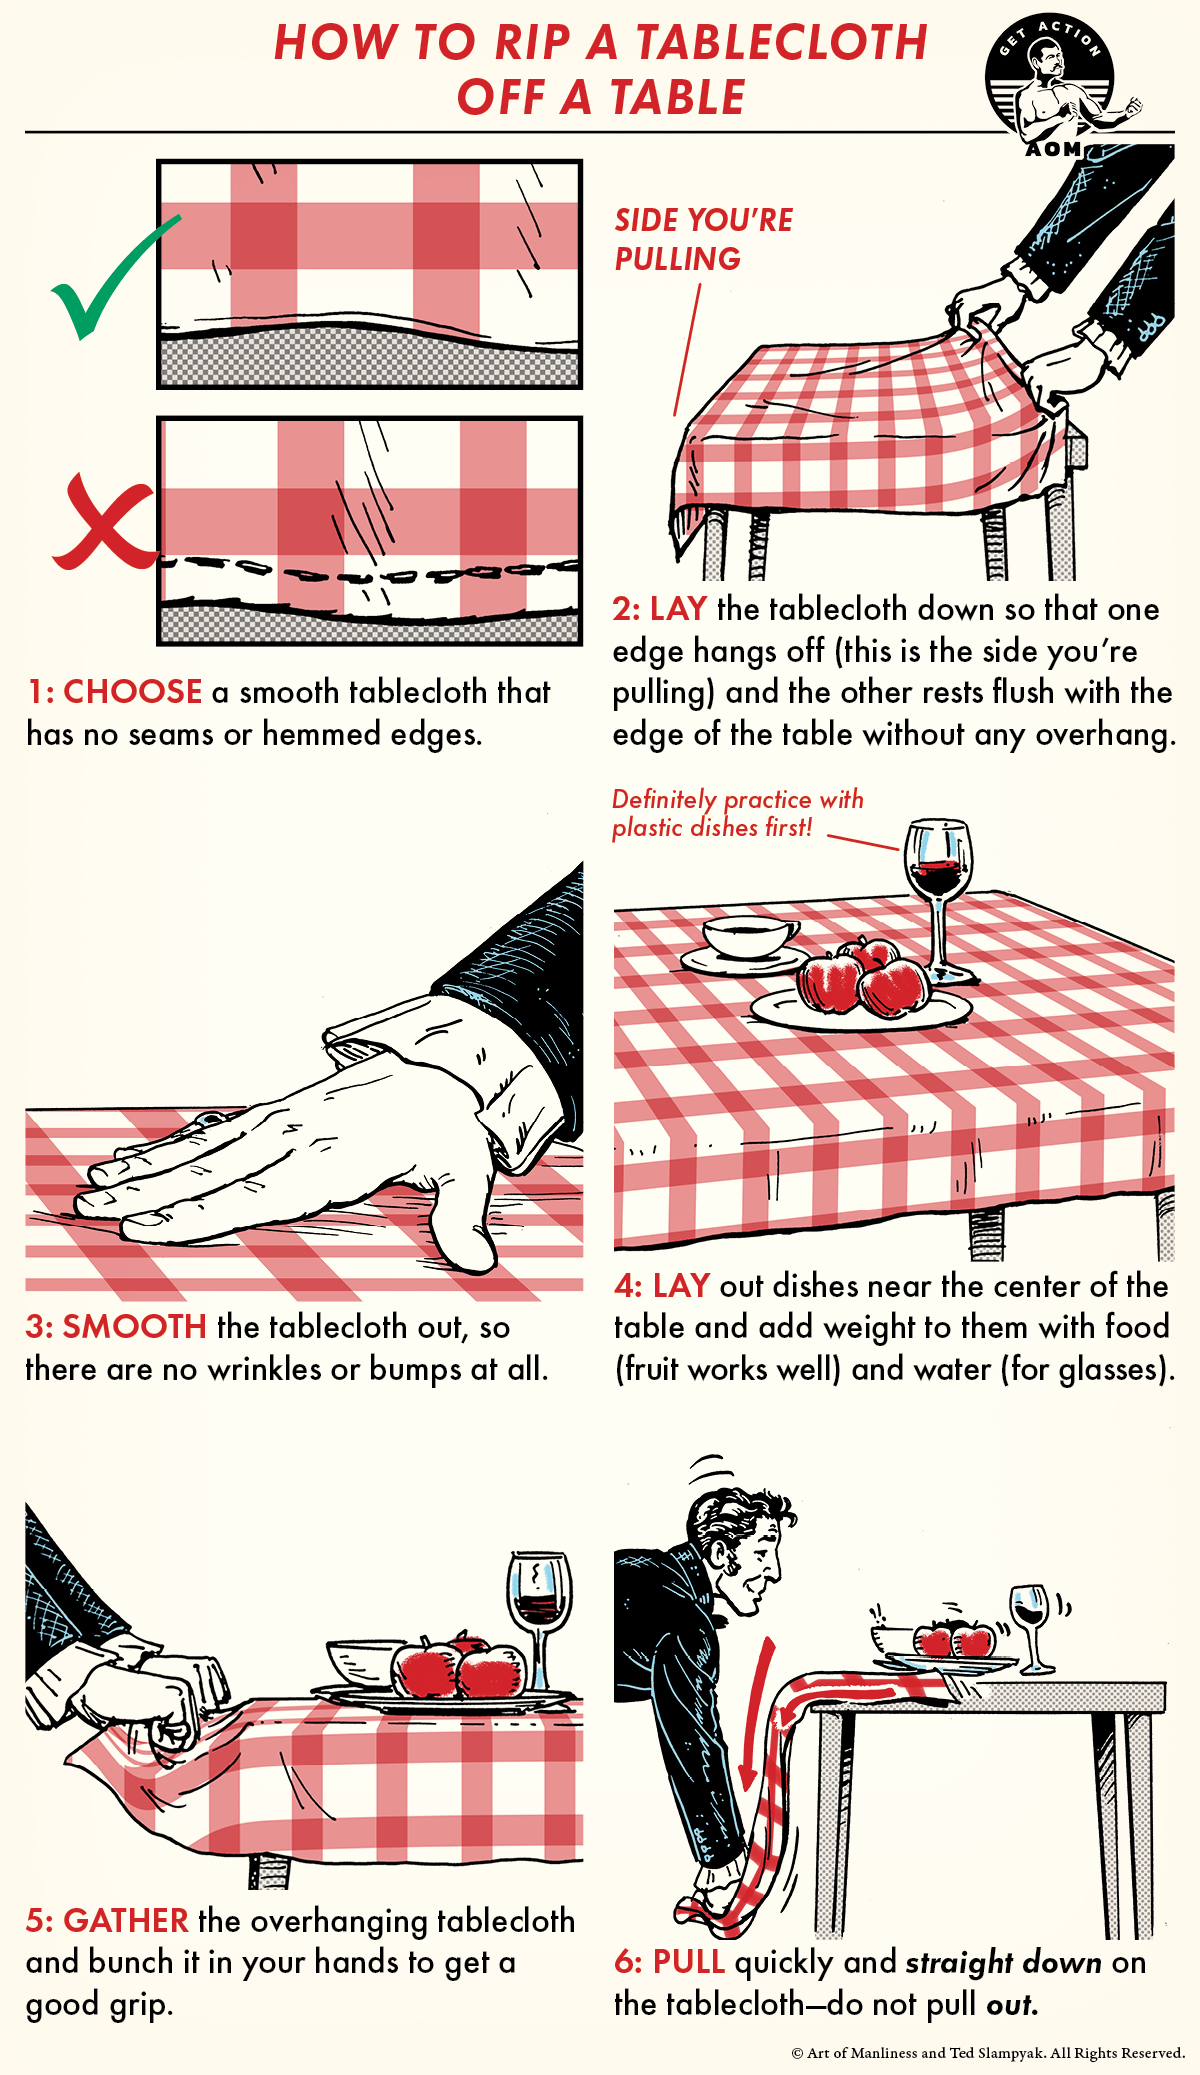 How to Rip a Tablecloth Off a Table comic guide.